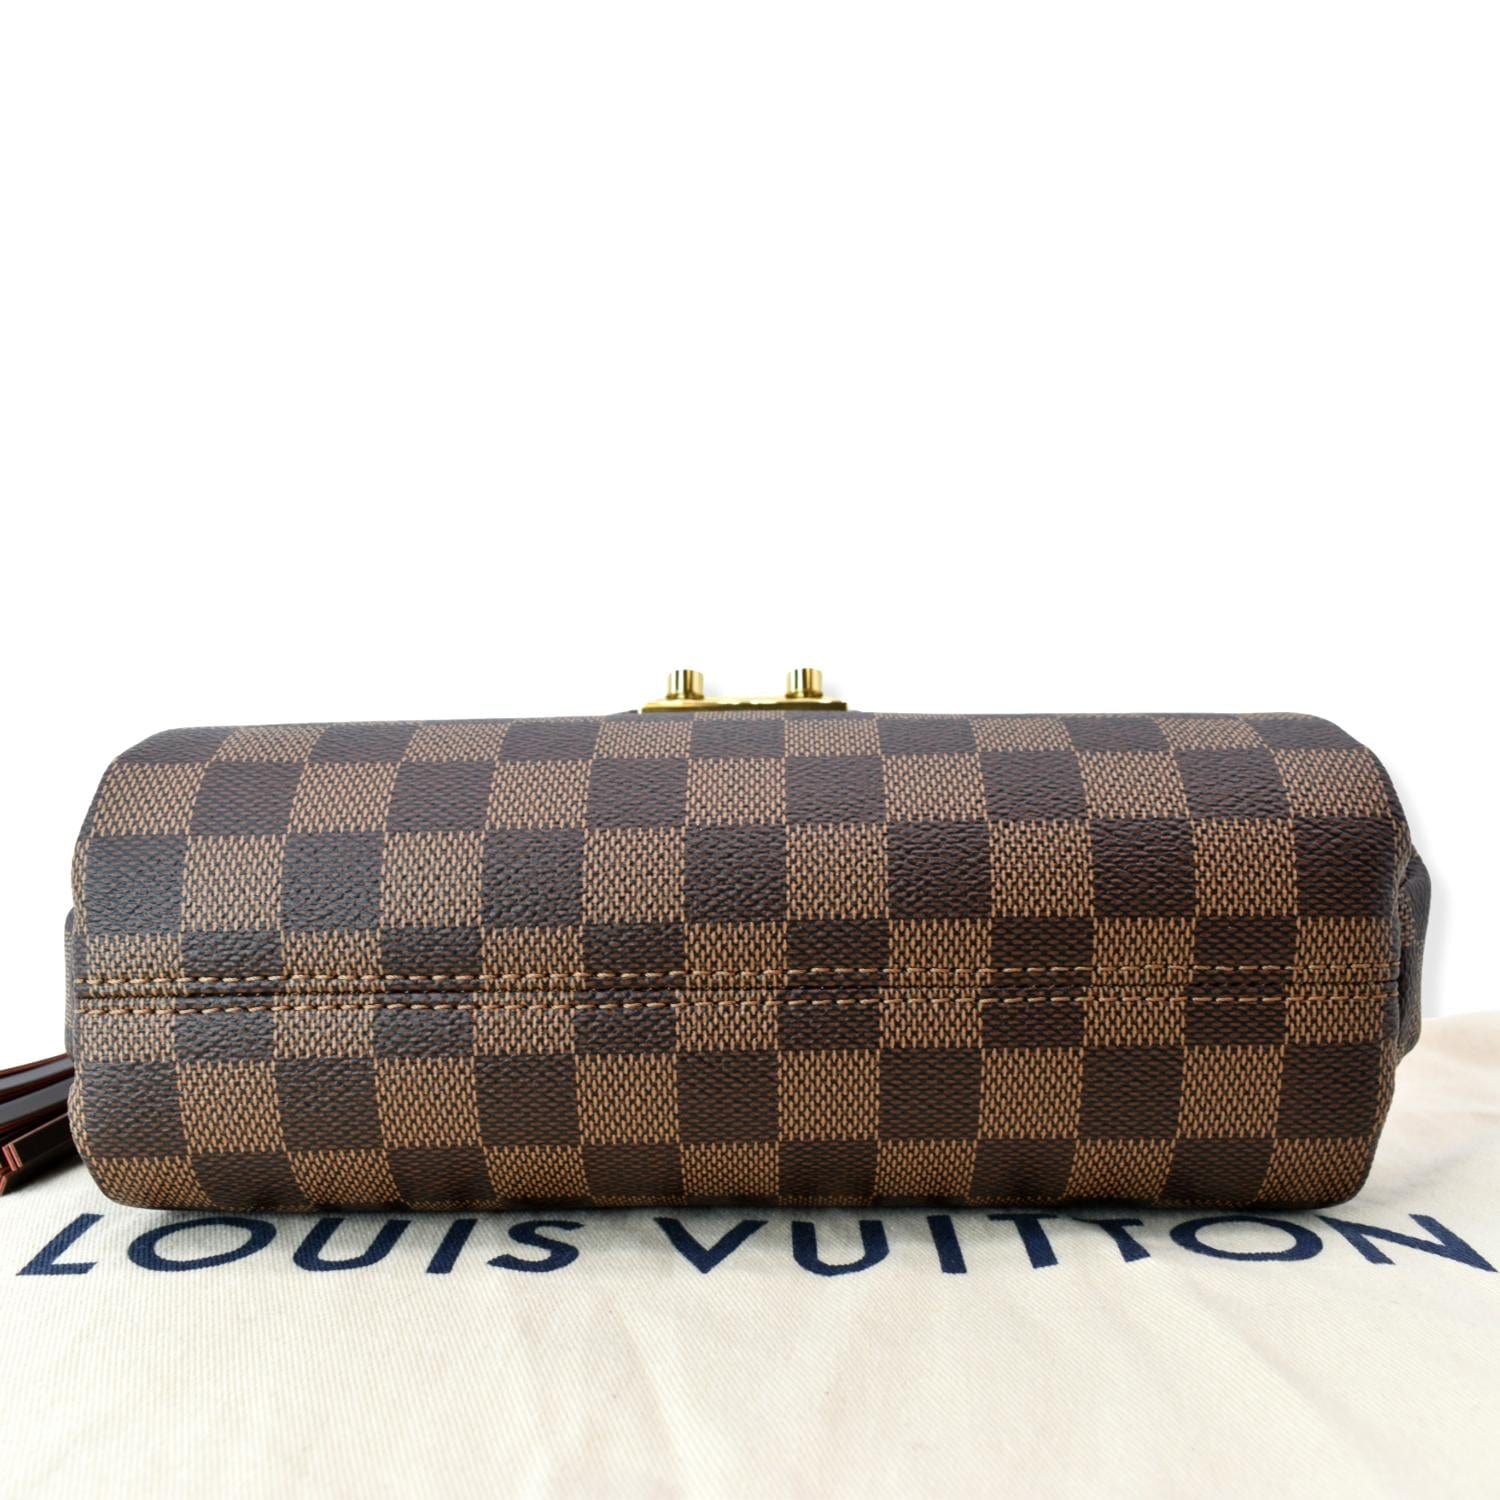 Review classic LV bag, Croisette Damier👜, Gallery posted by dhieava